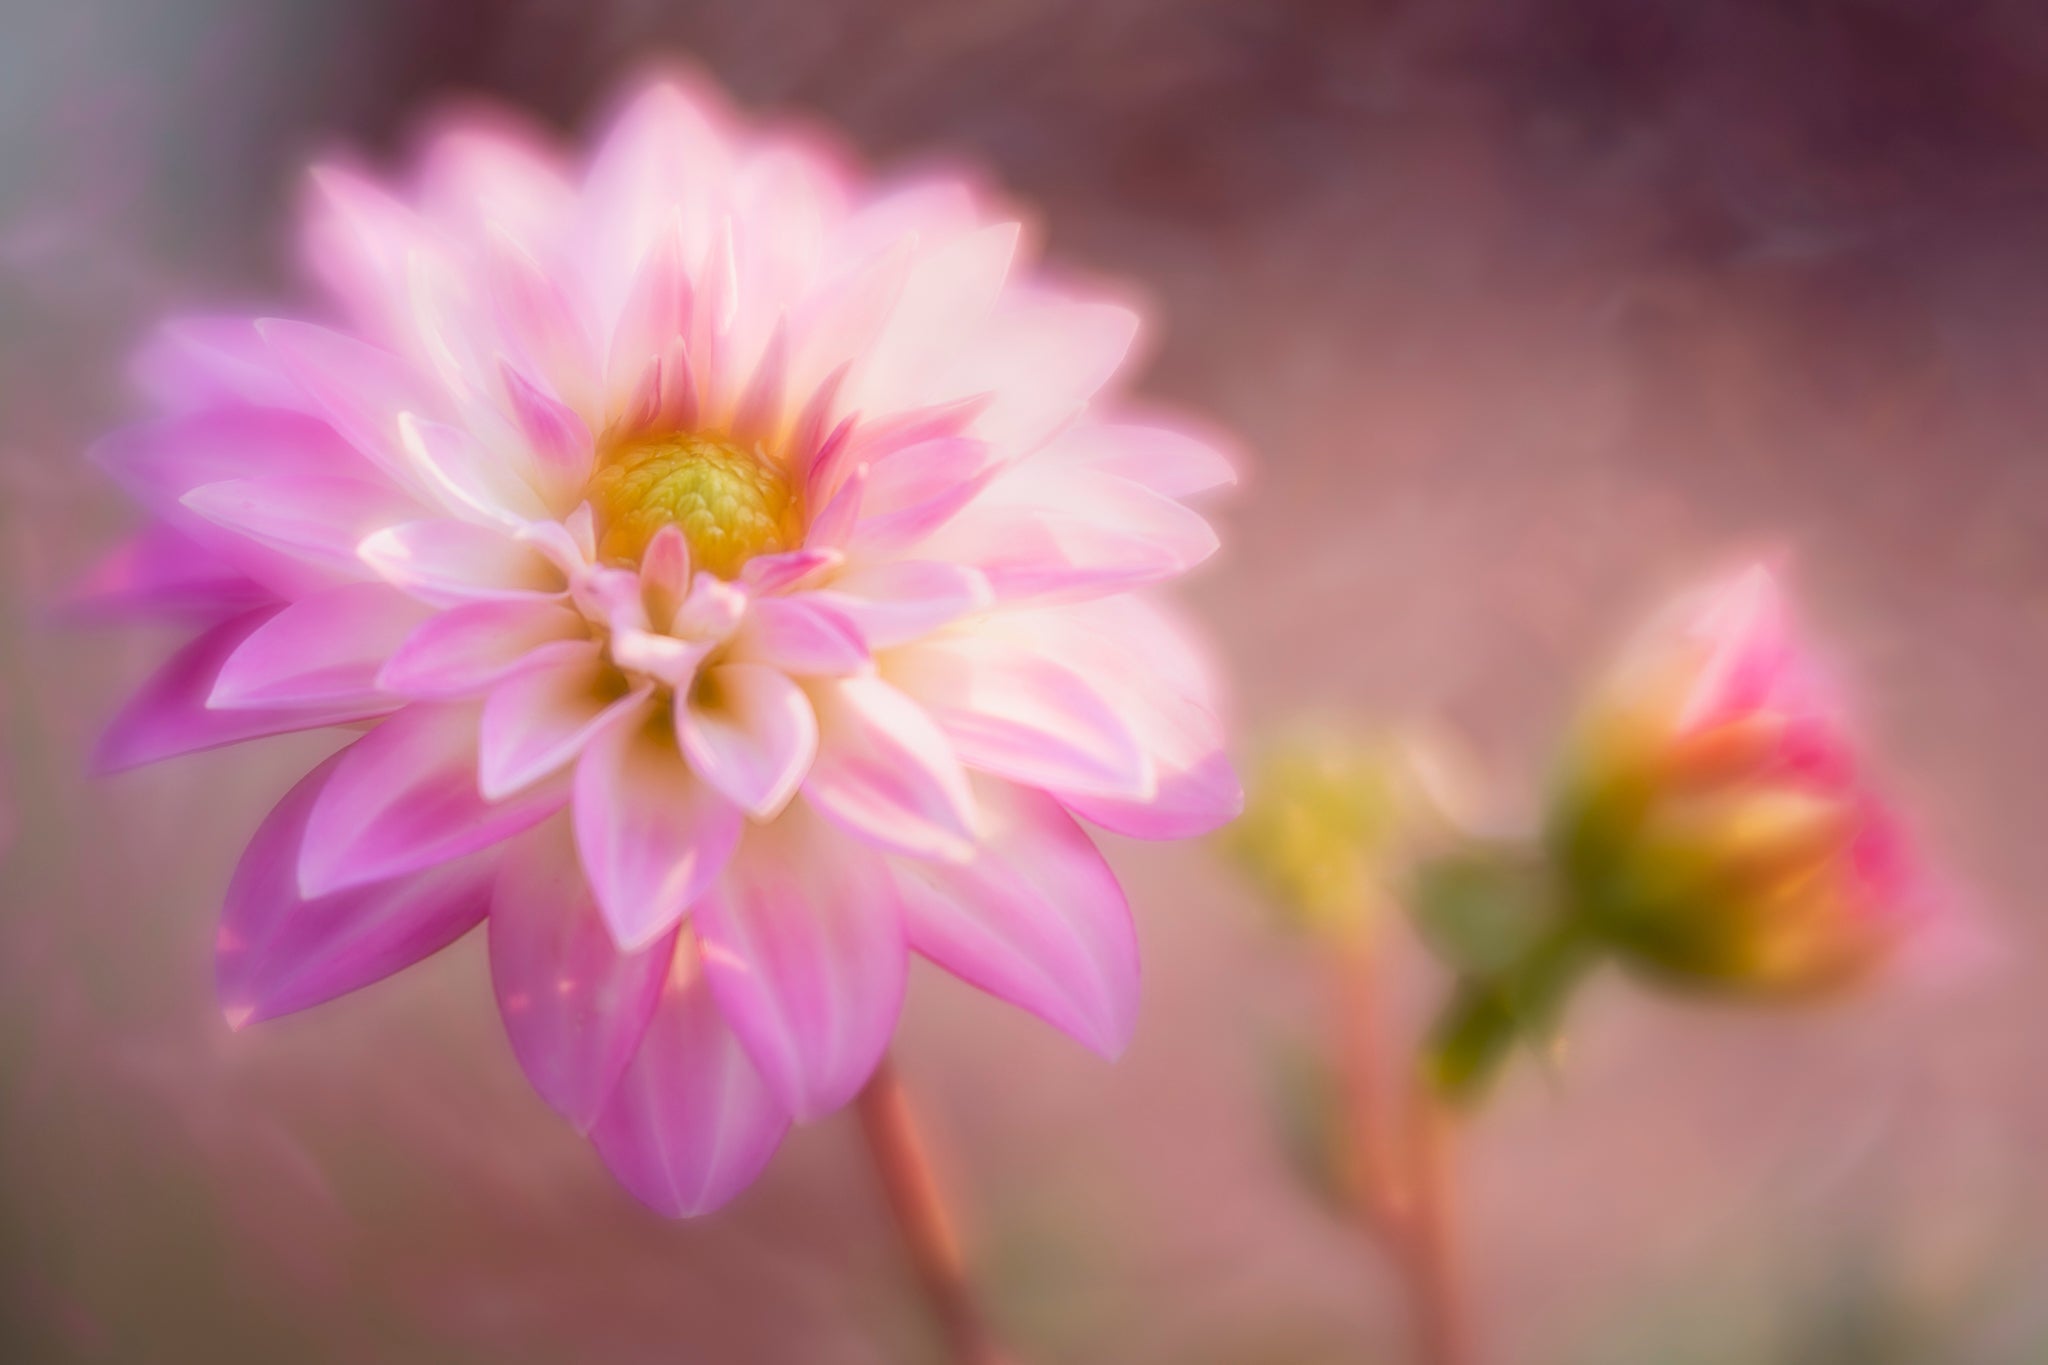 A beautiful picture of a Dahlia in the sunlight, taken by Cameron Dreaux.